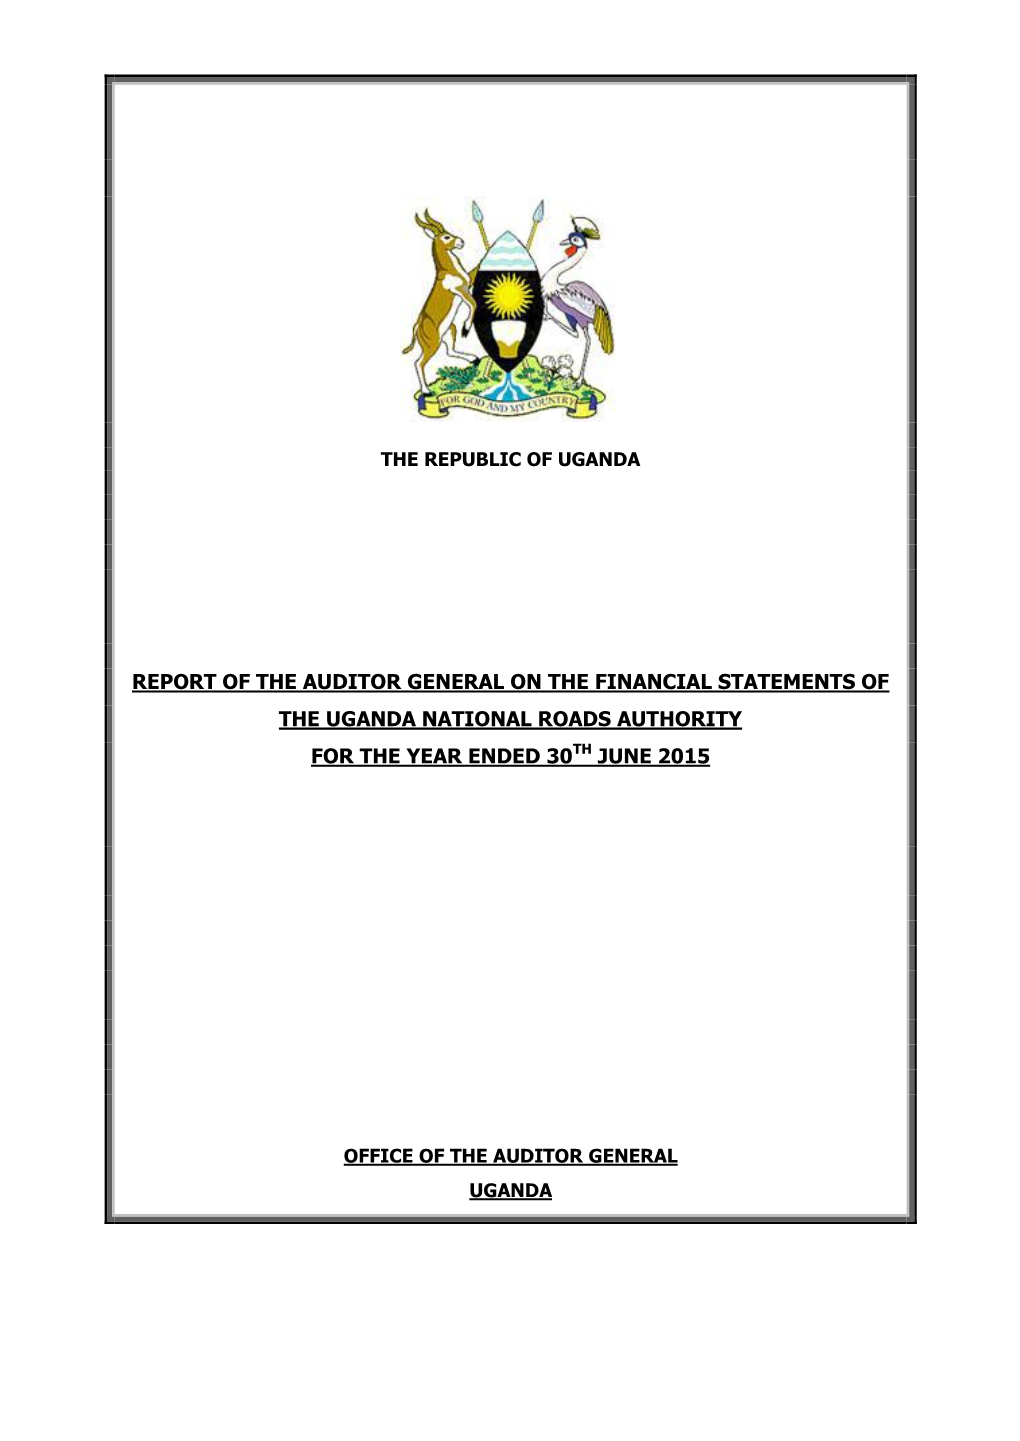 Report of the Auditor General on the Financial Statements of the Uganda National Roads Authority for the Year Ended 30Th June 2015